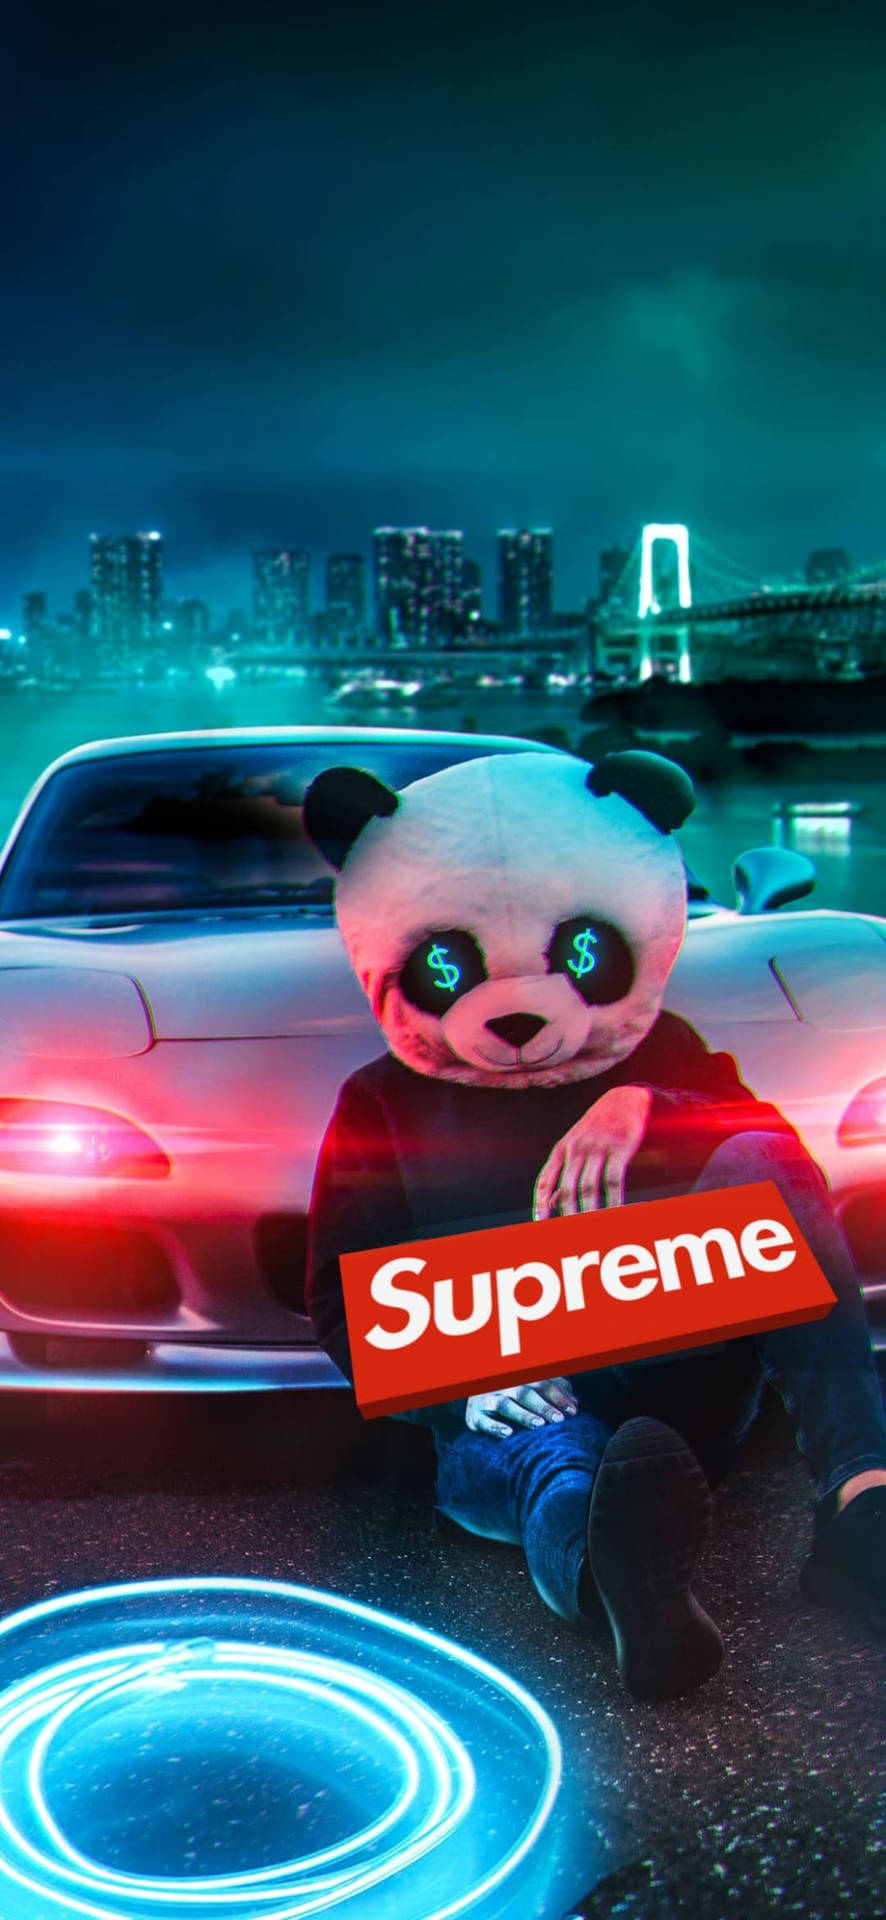 Epic Red Supreme With Panda